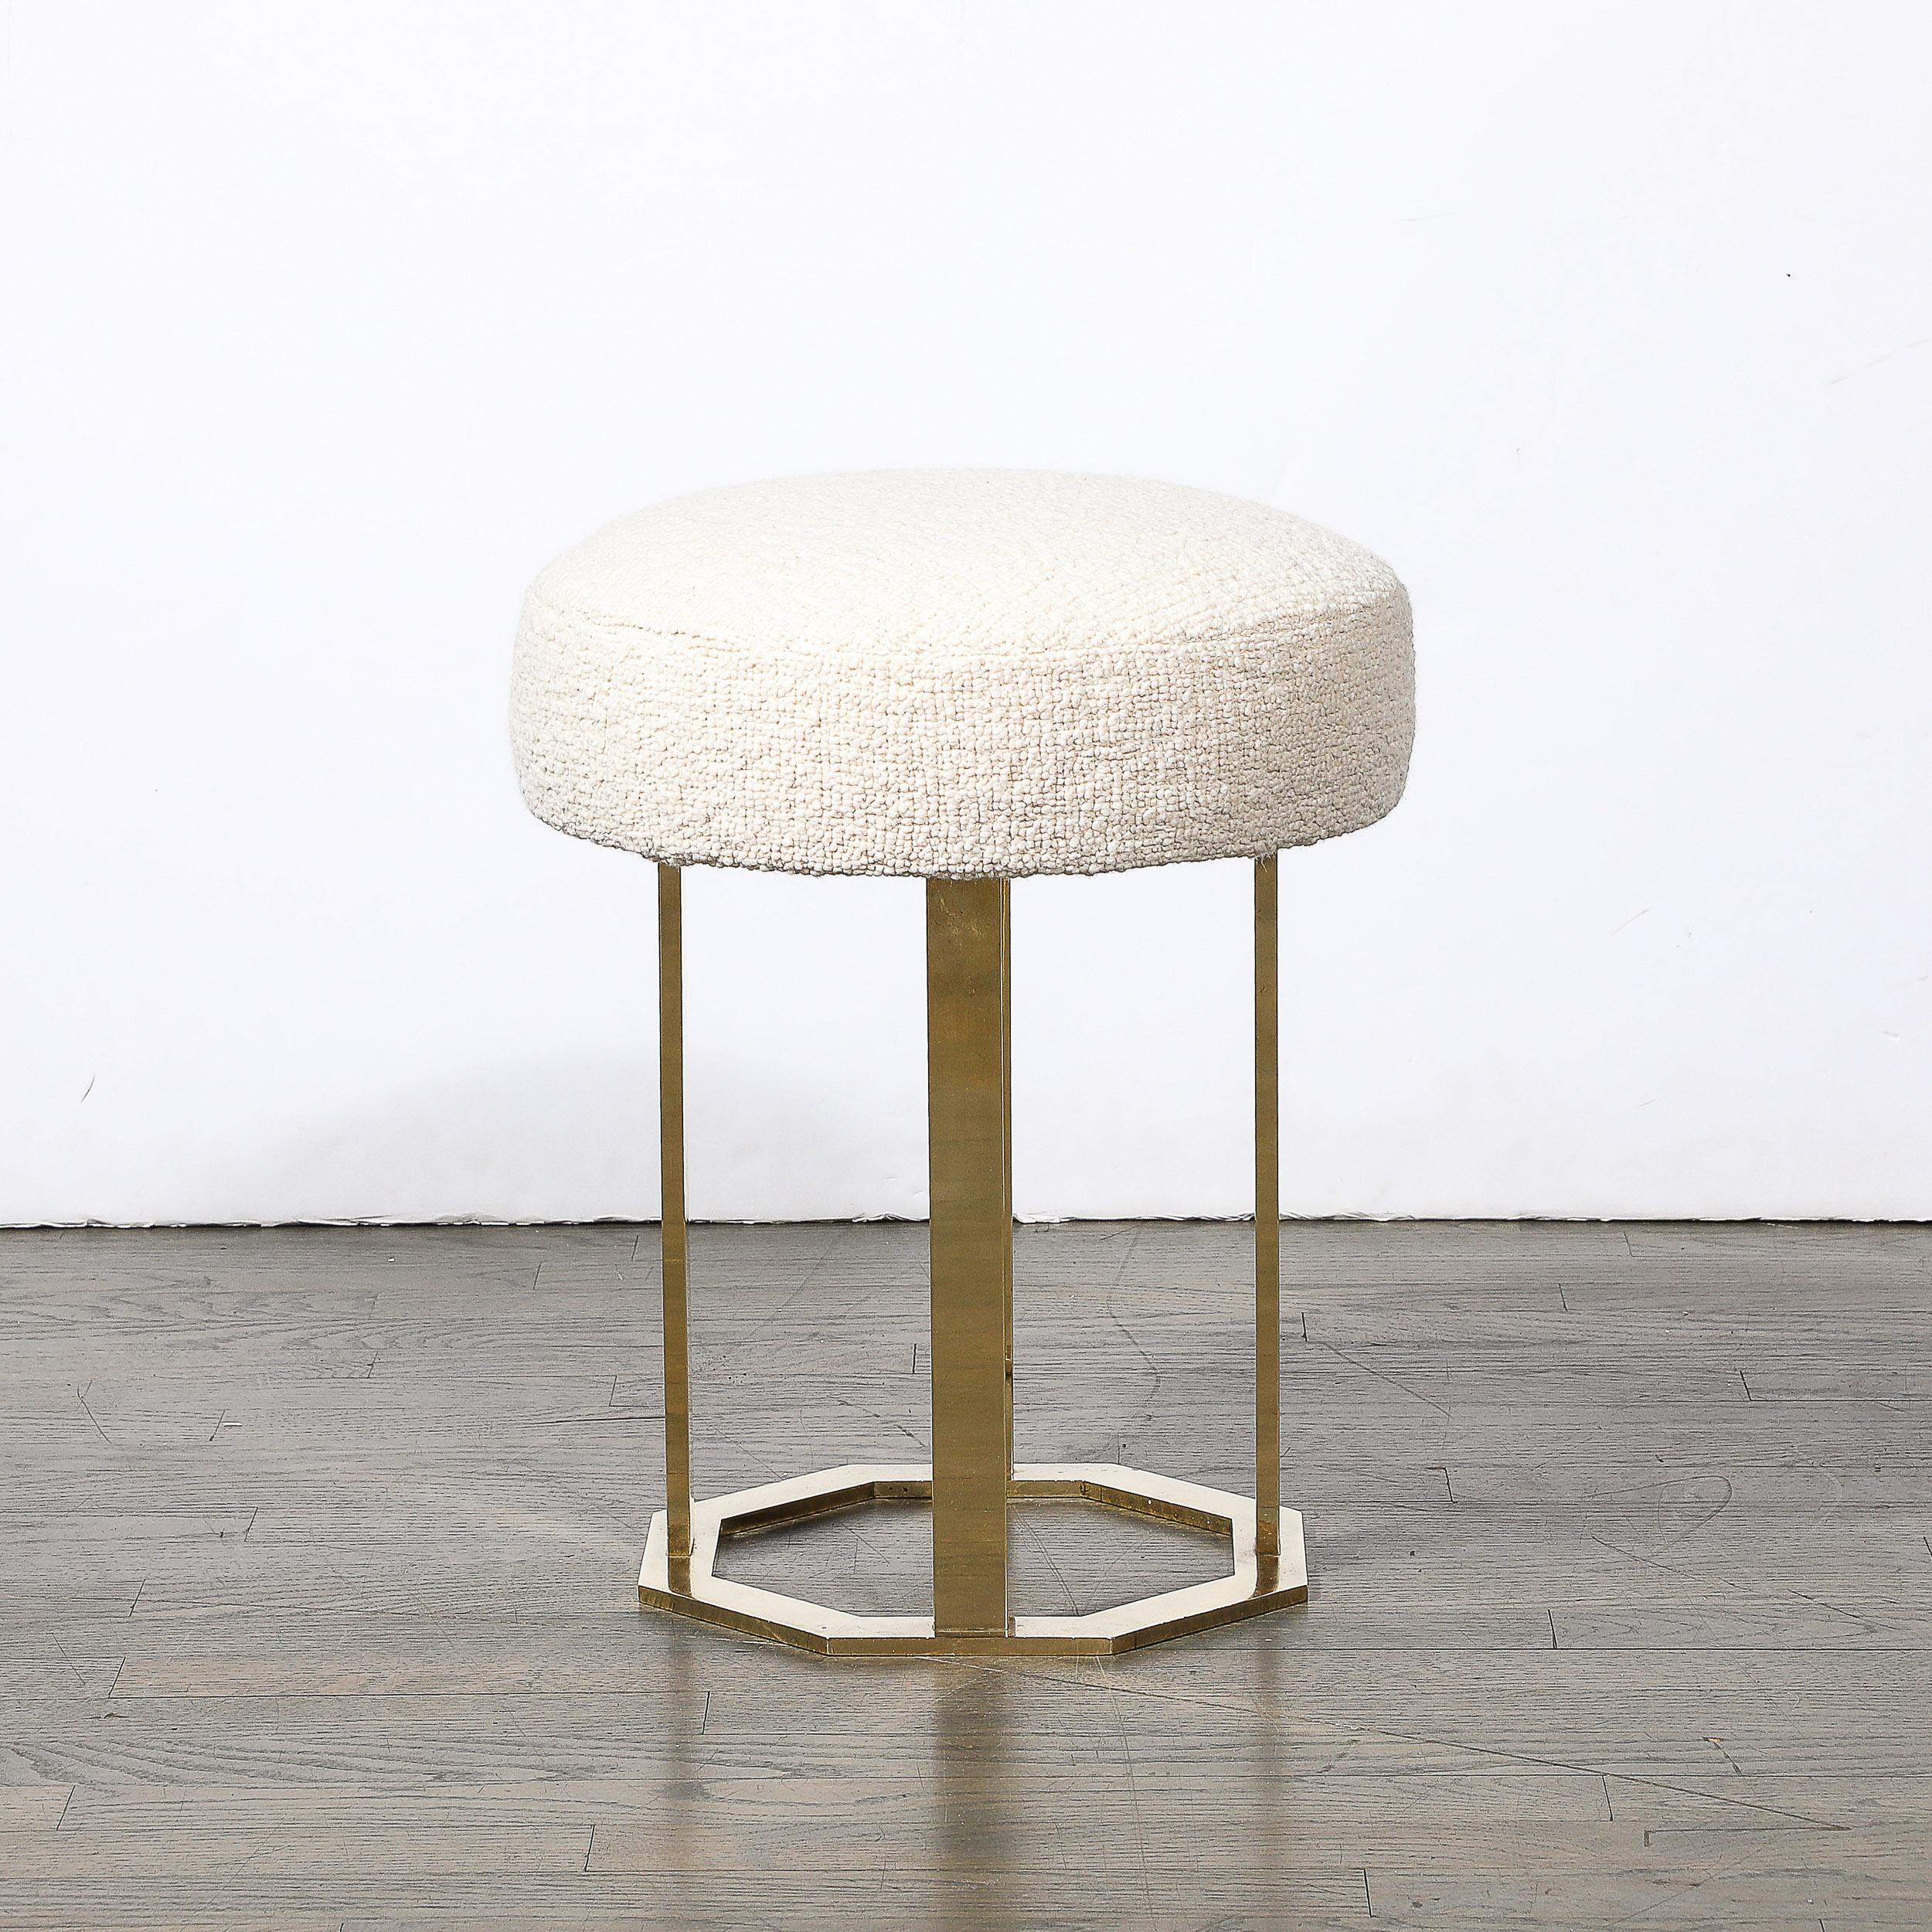 American Mid-Century Modernist Octagonal Polished Brass Base Stool in Holly Hunt Boucle For Sale